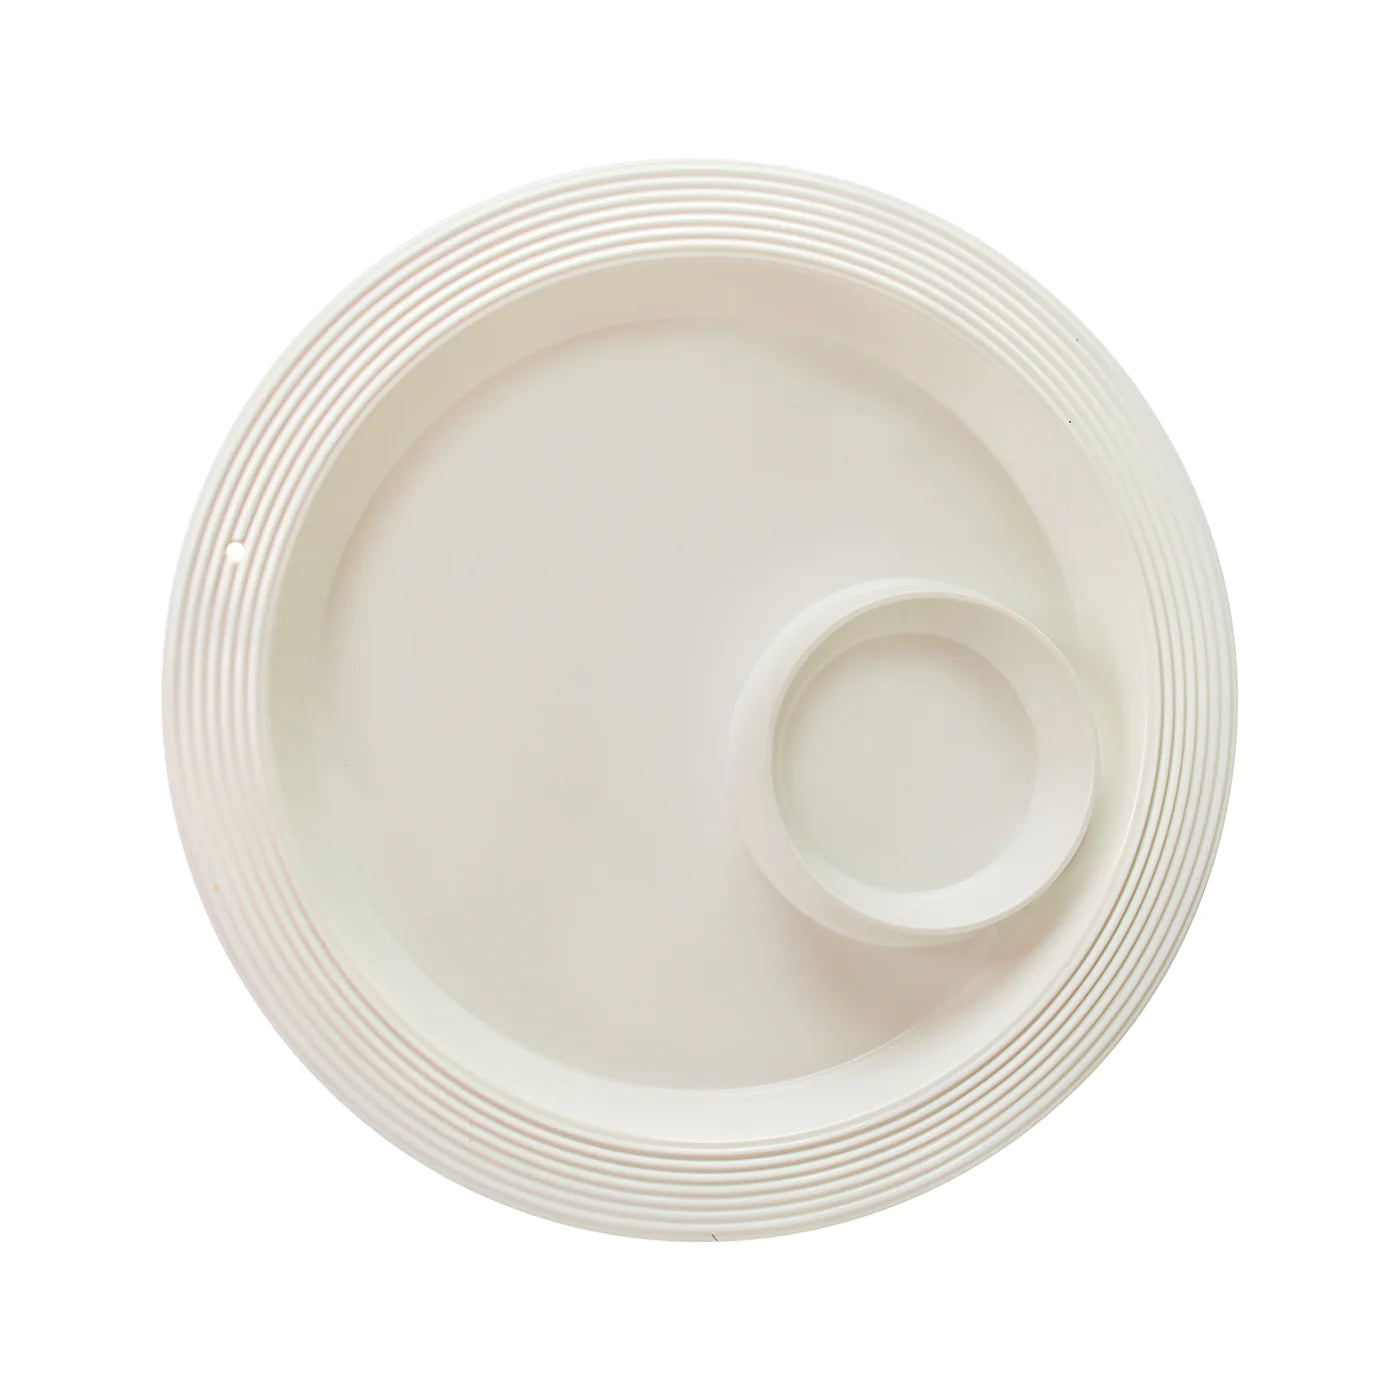 Chip and Dip Melamine Nora Fleming